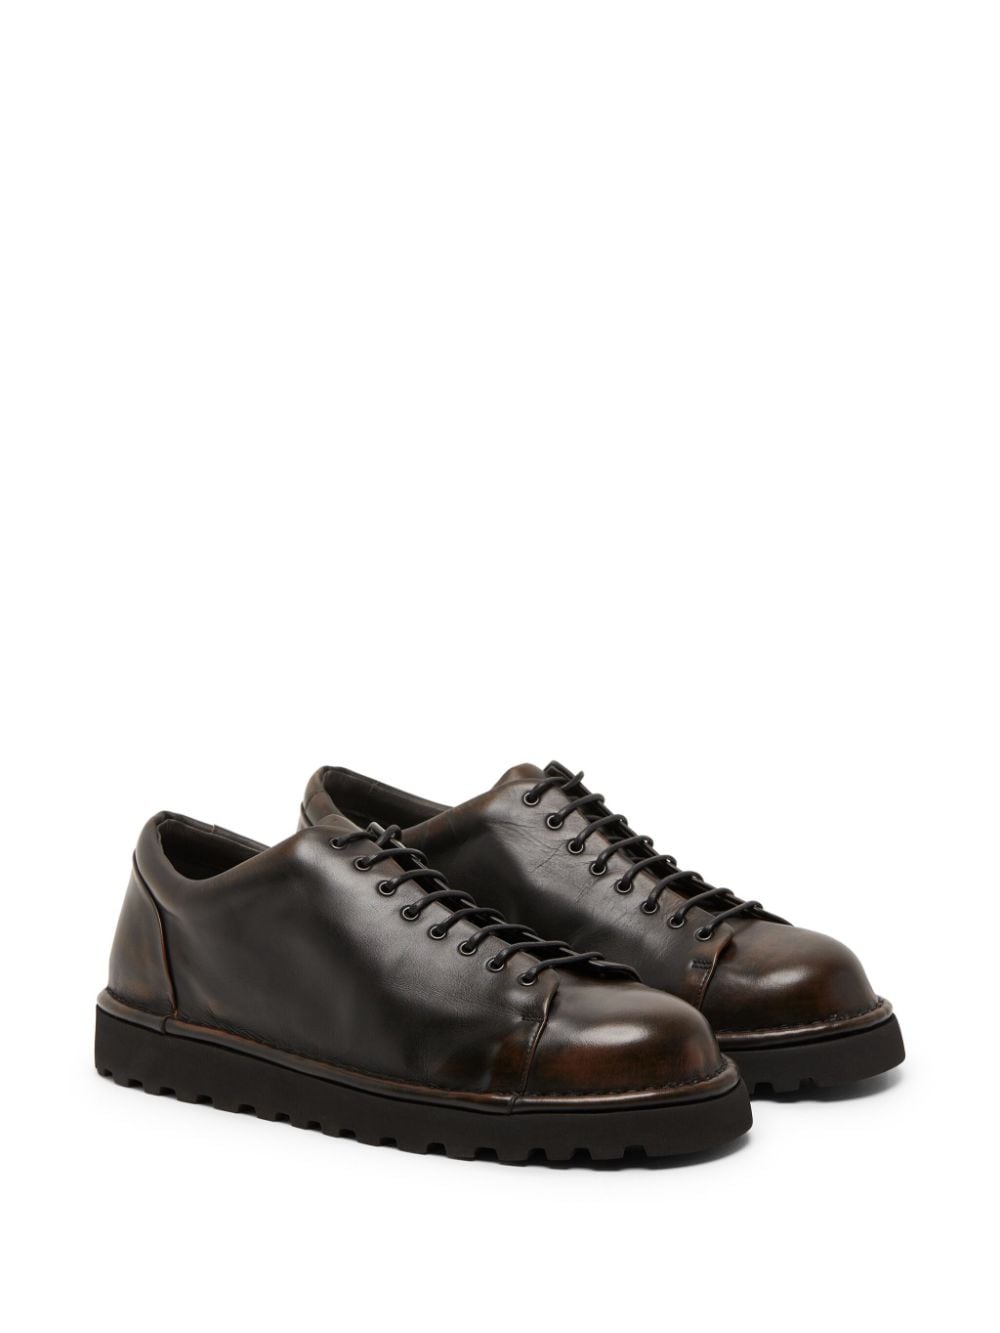 Marsèll Pallotola Pomice leather derby shoes - Bruin